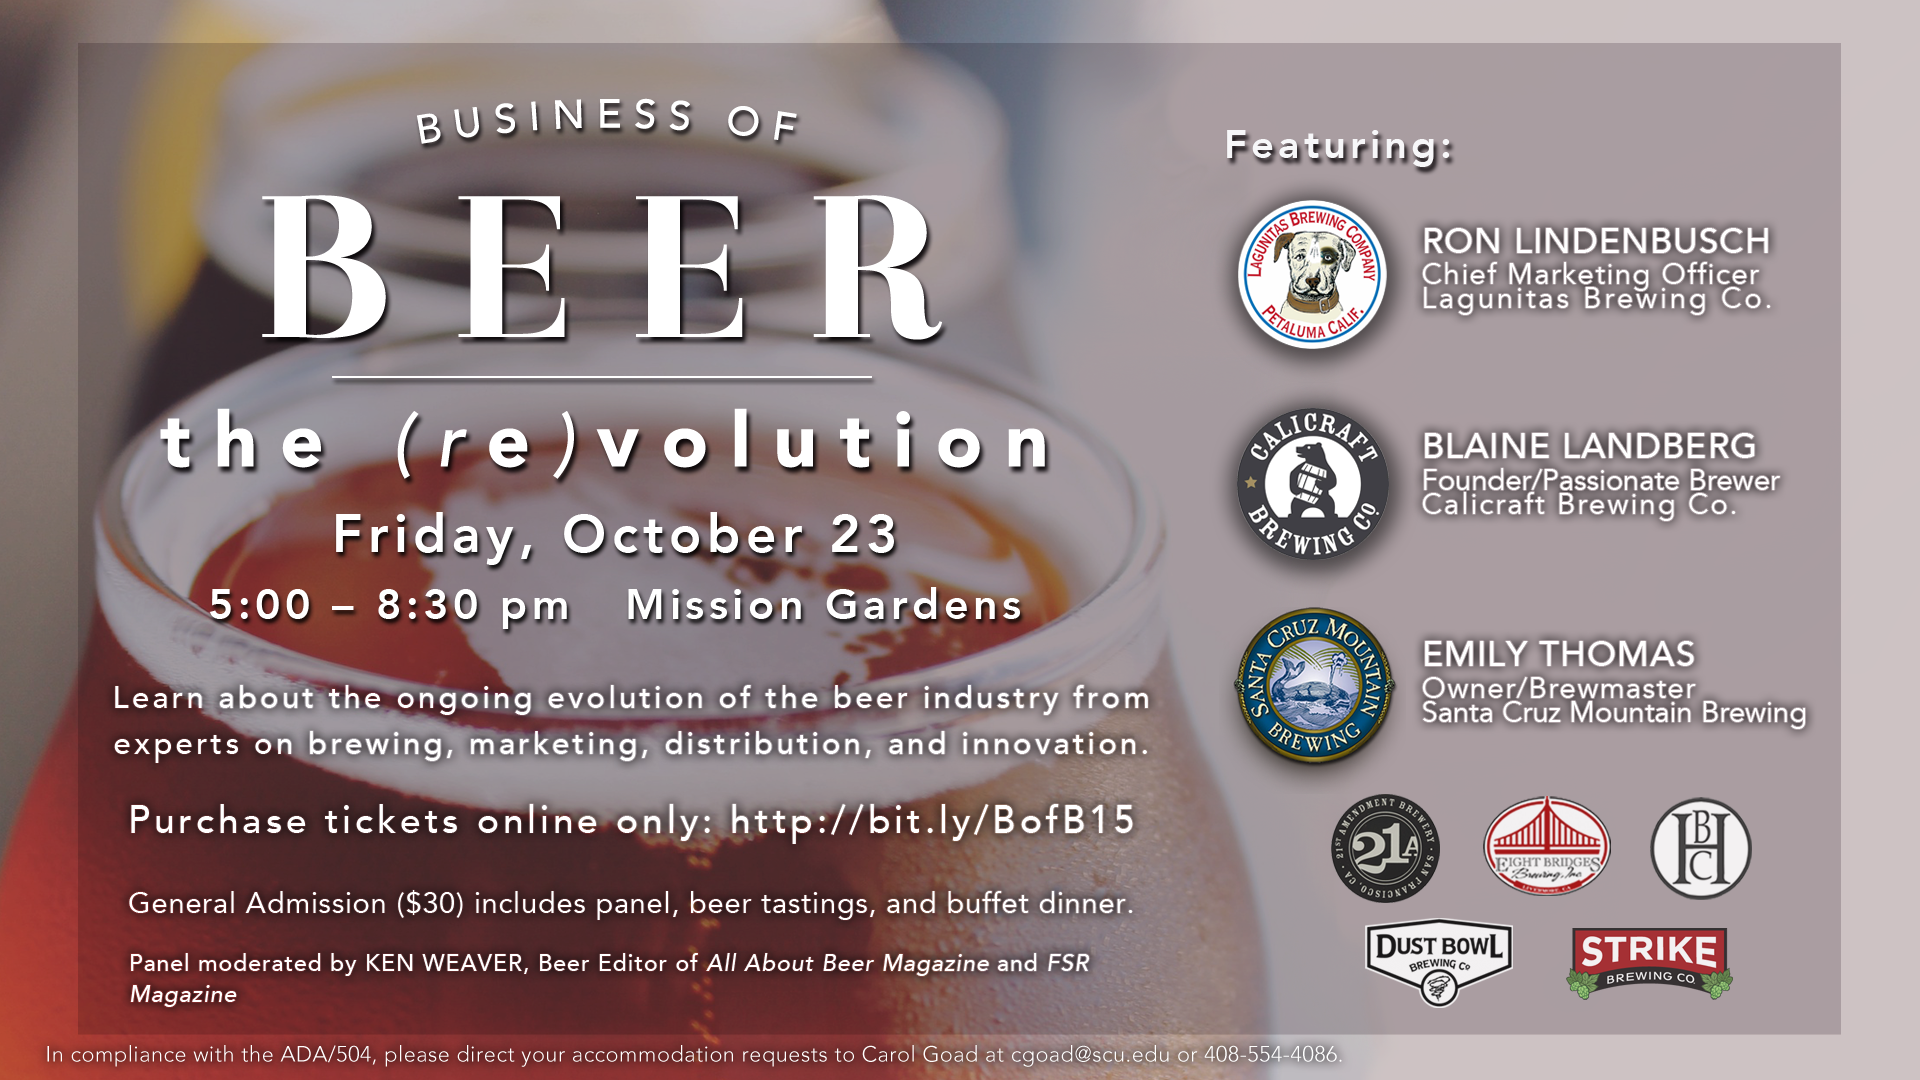 Business of Beer 2015 event flyer image link to story